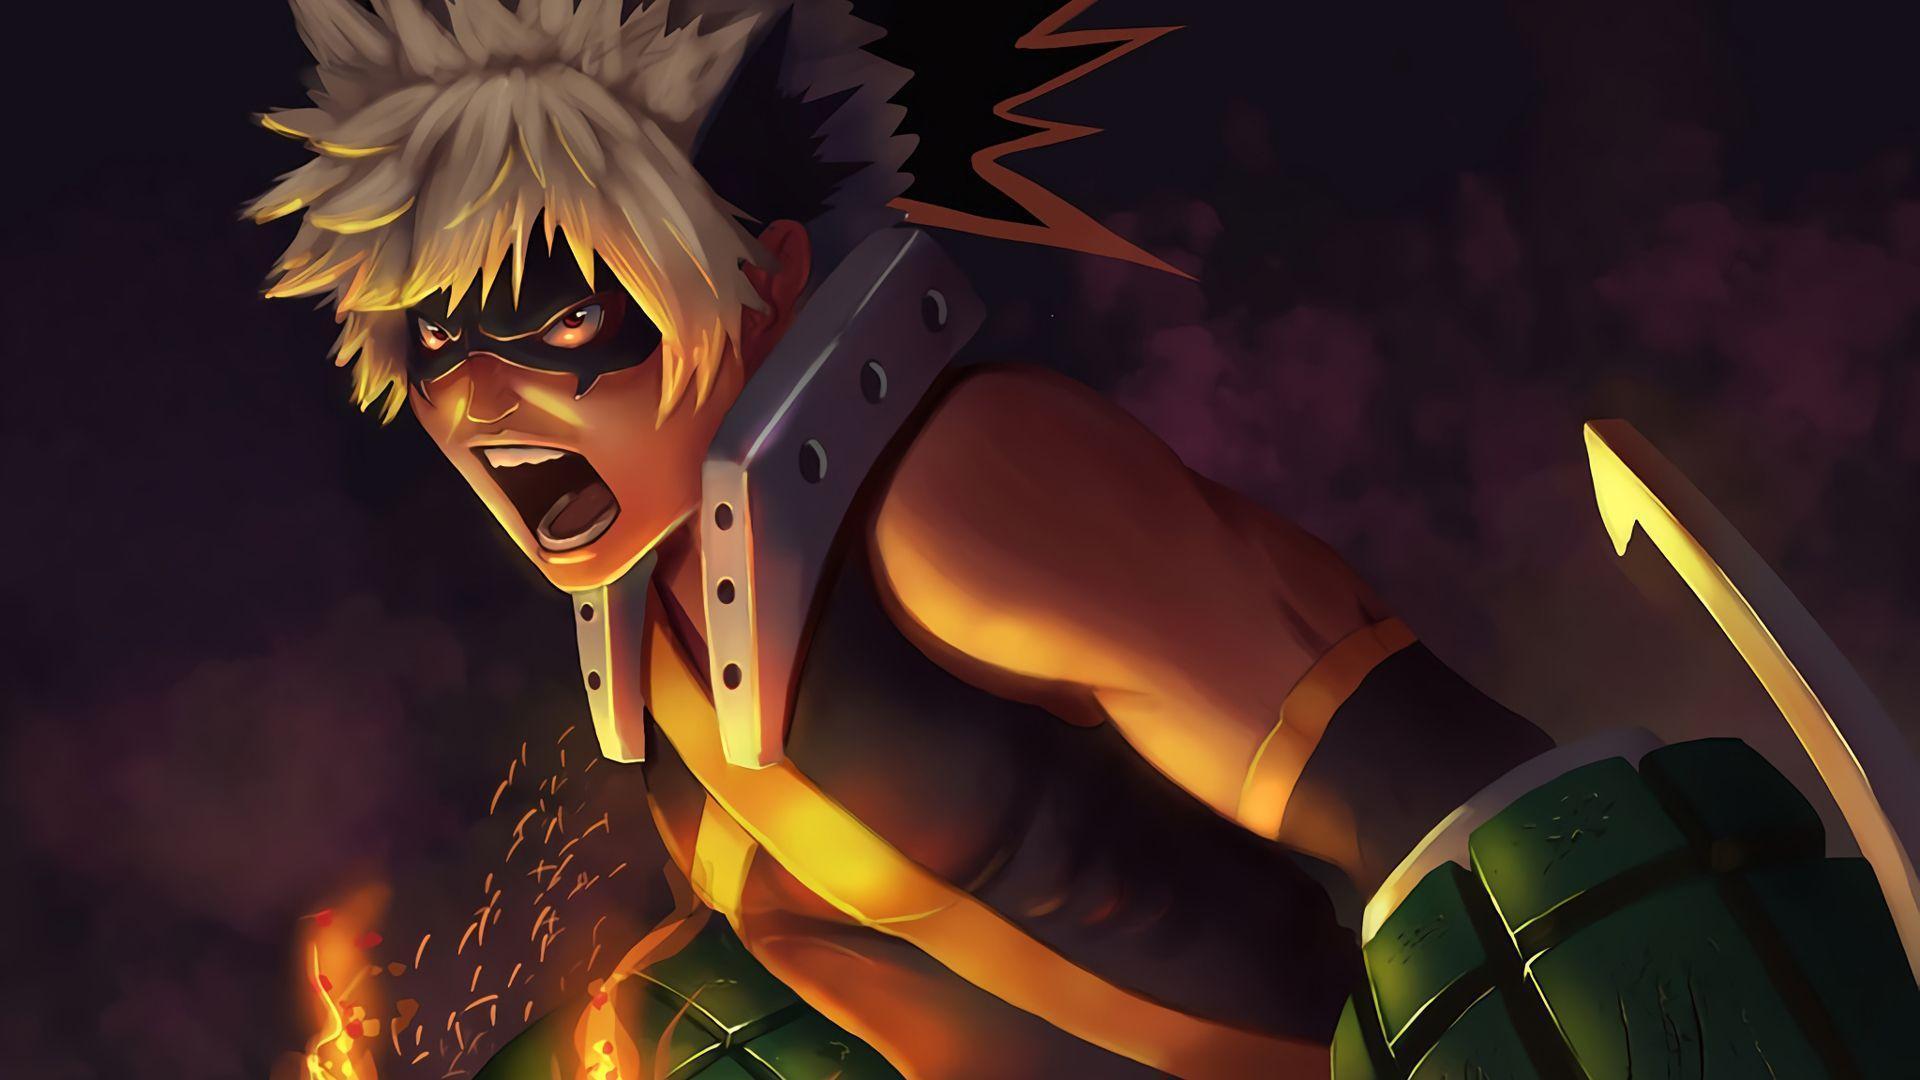 Bakugou Wallpaper Pc Hd / 3D Live Wallpapers for PC (53+ images) - Download...